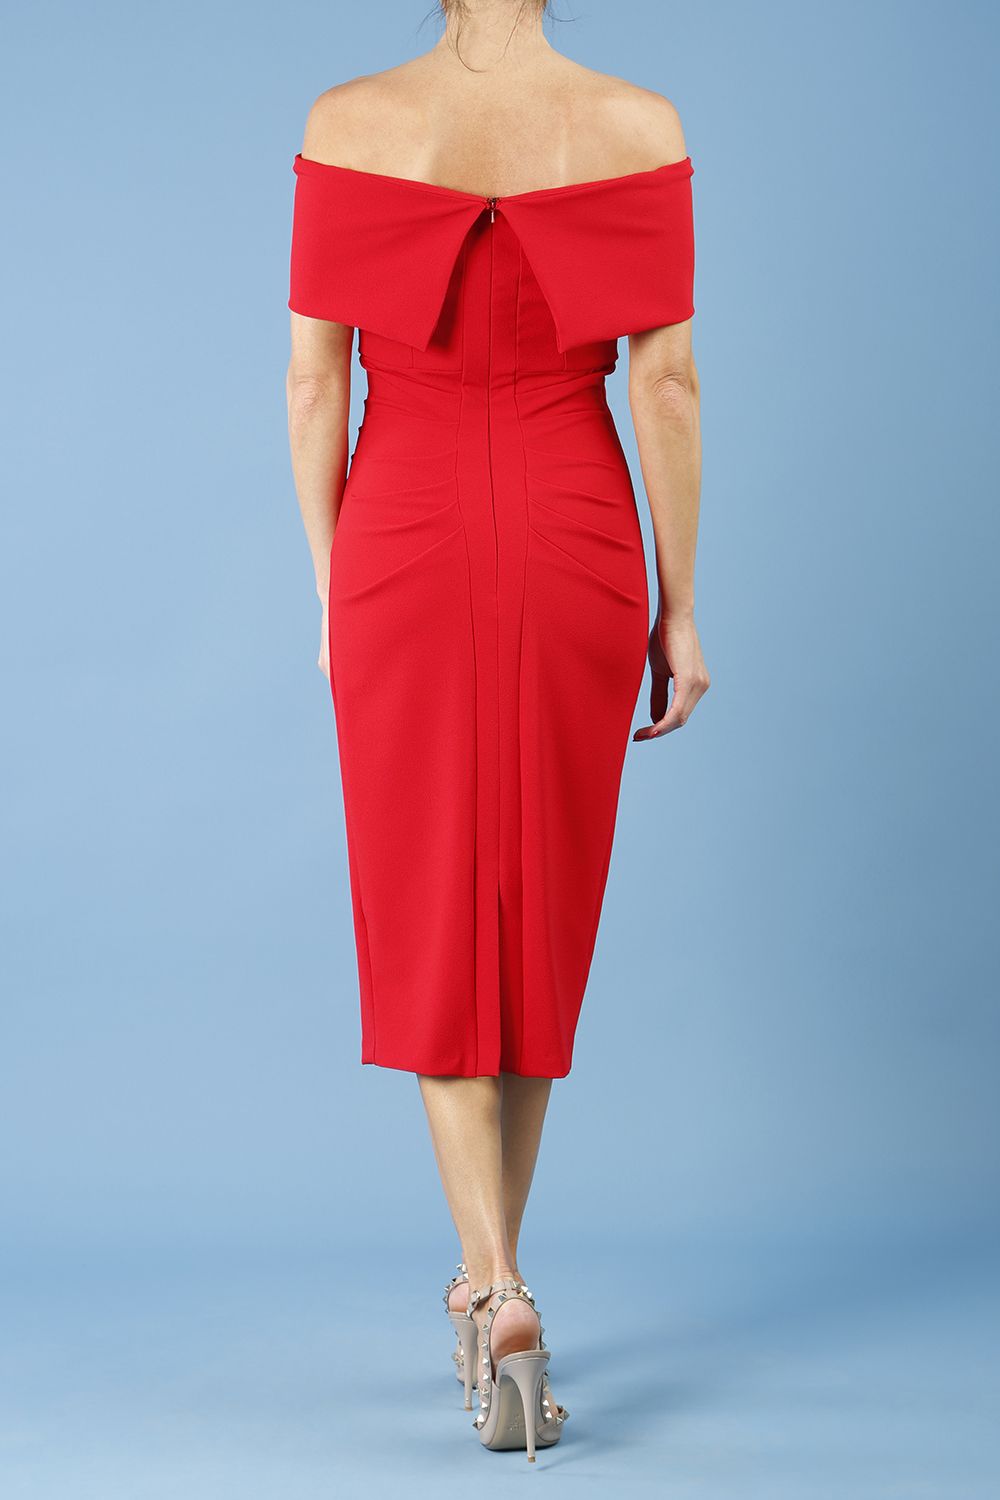 model is wearing diva catwalk amelia pencil dress with bardot neckline and ruched back in scarlet red back